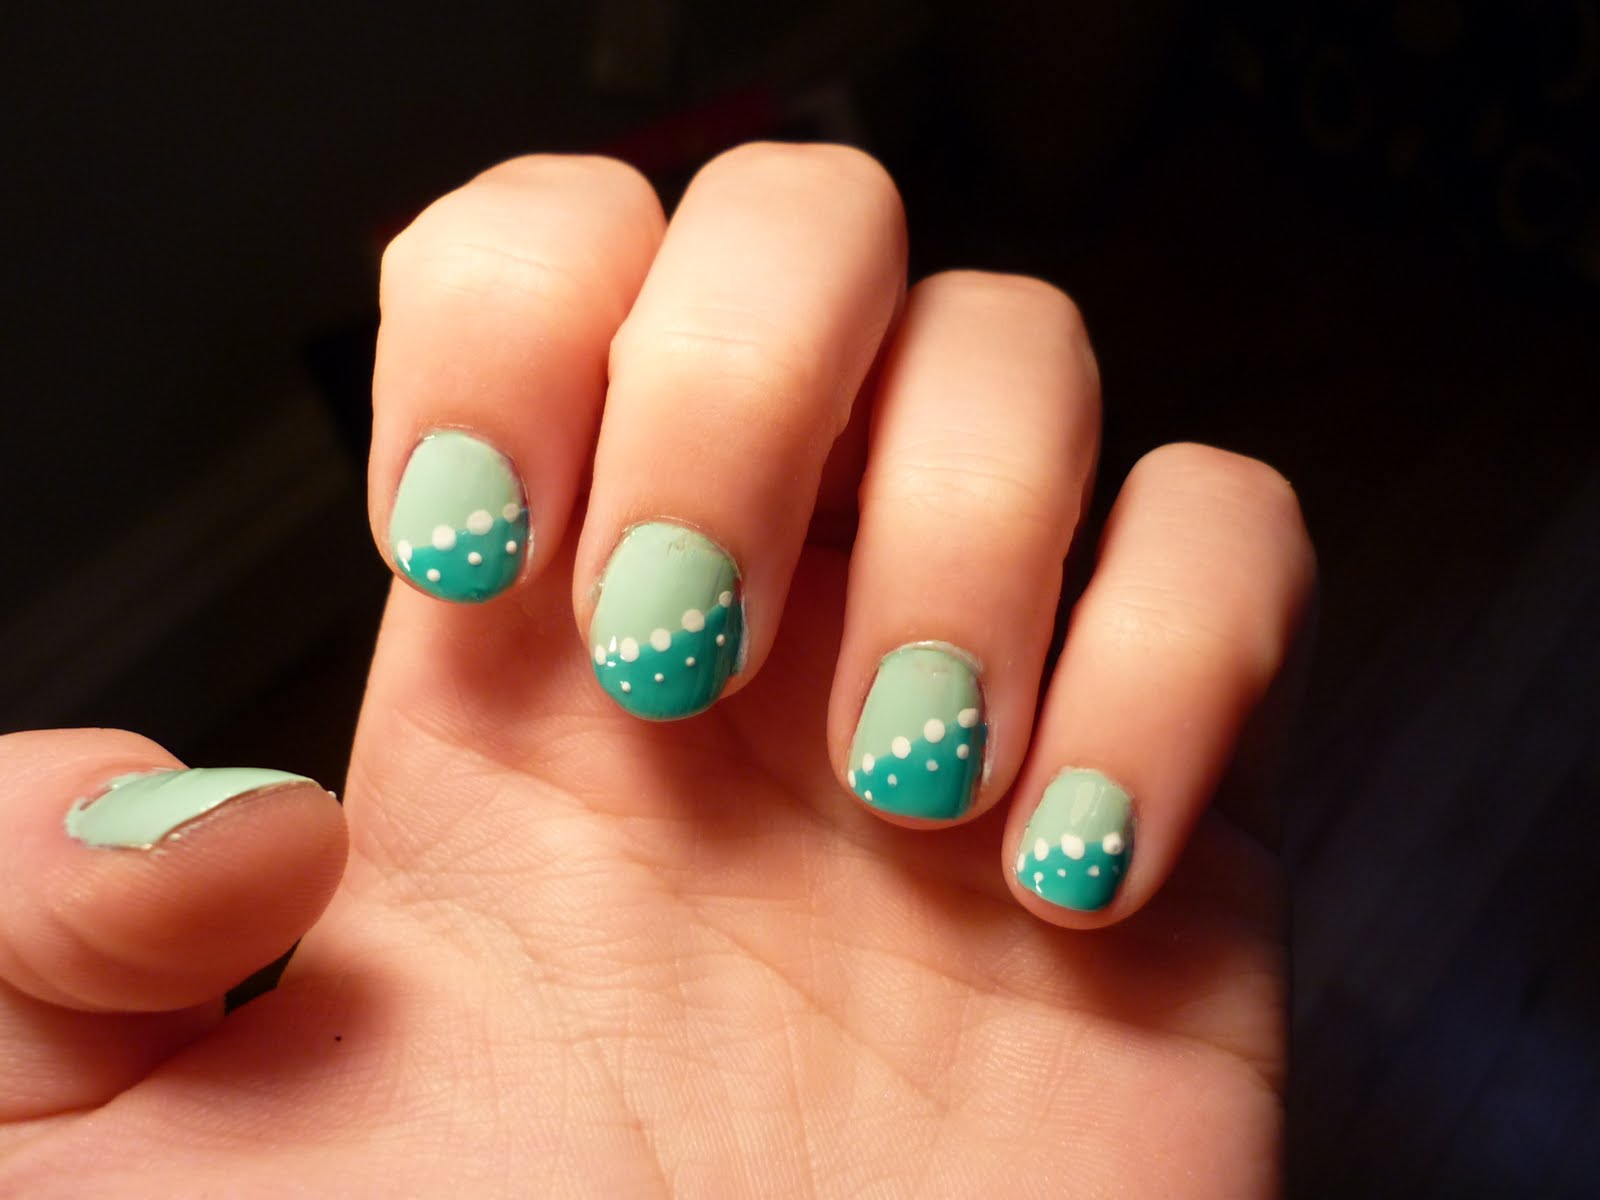 1. Simple and Easy Nail Art Designs for Beginners - wide 3